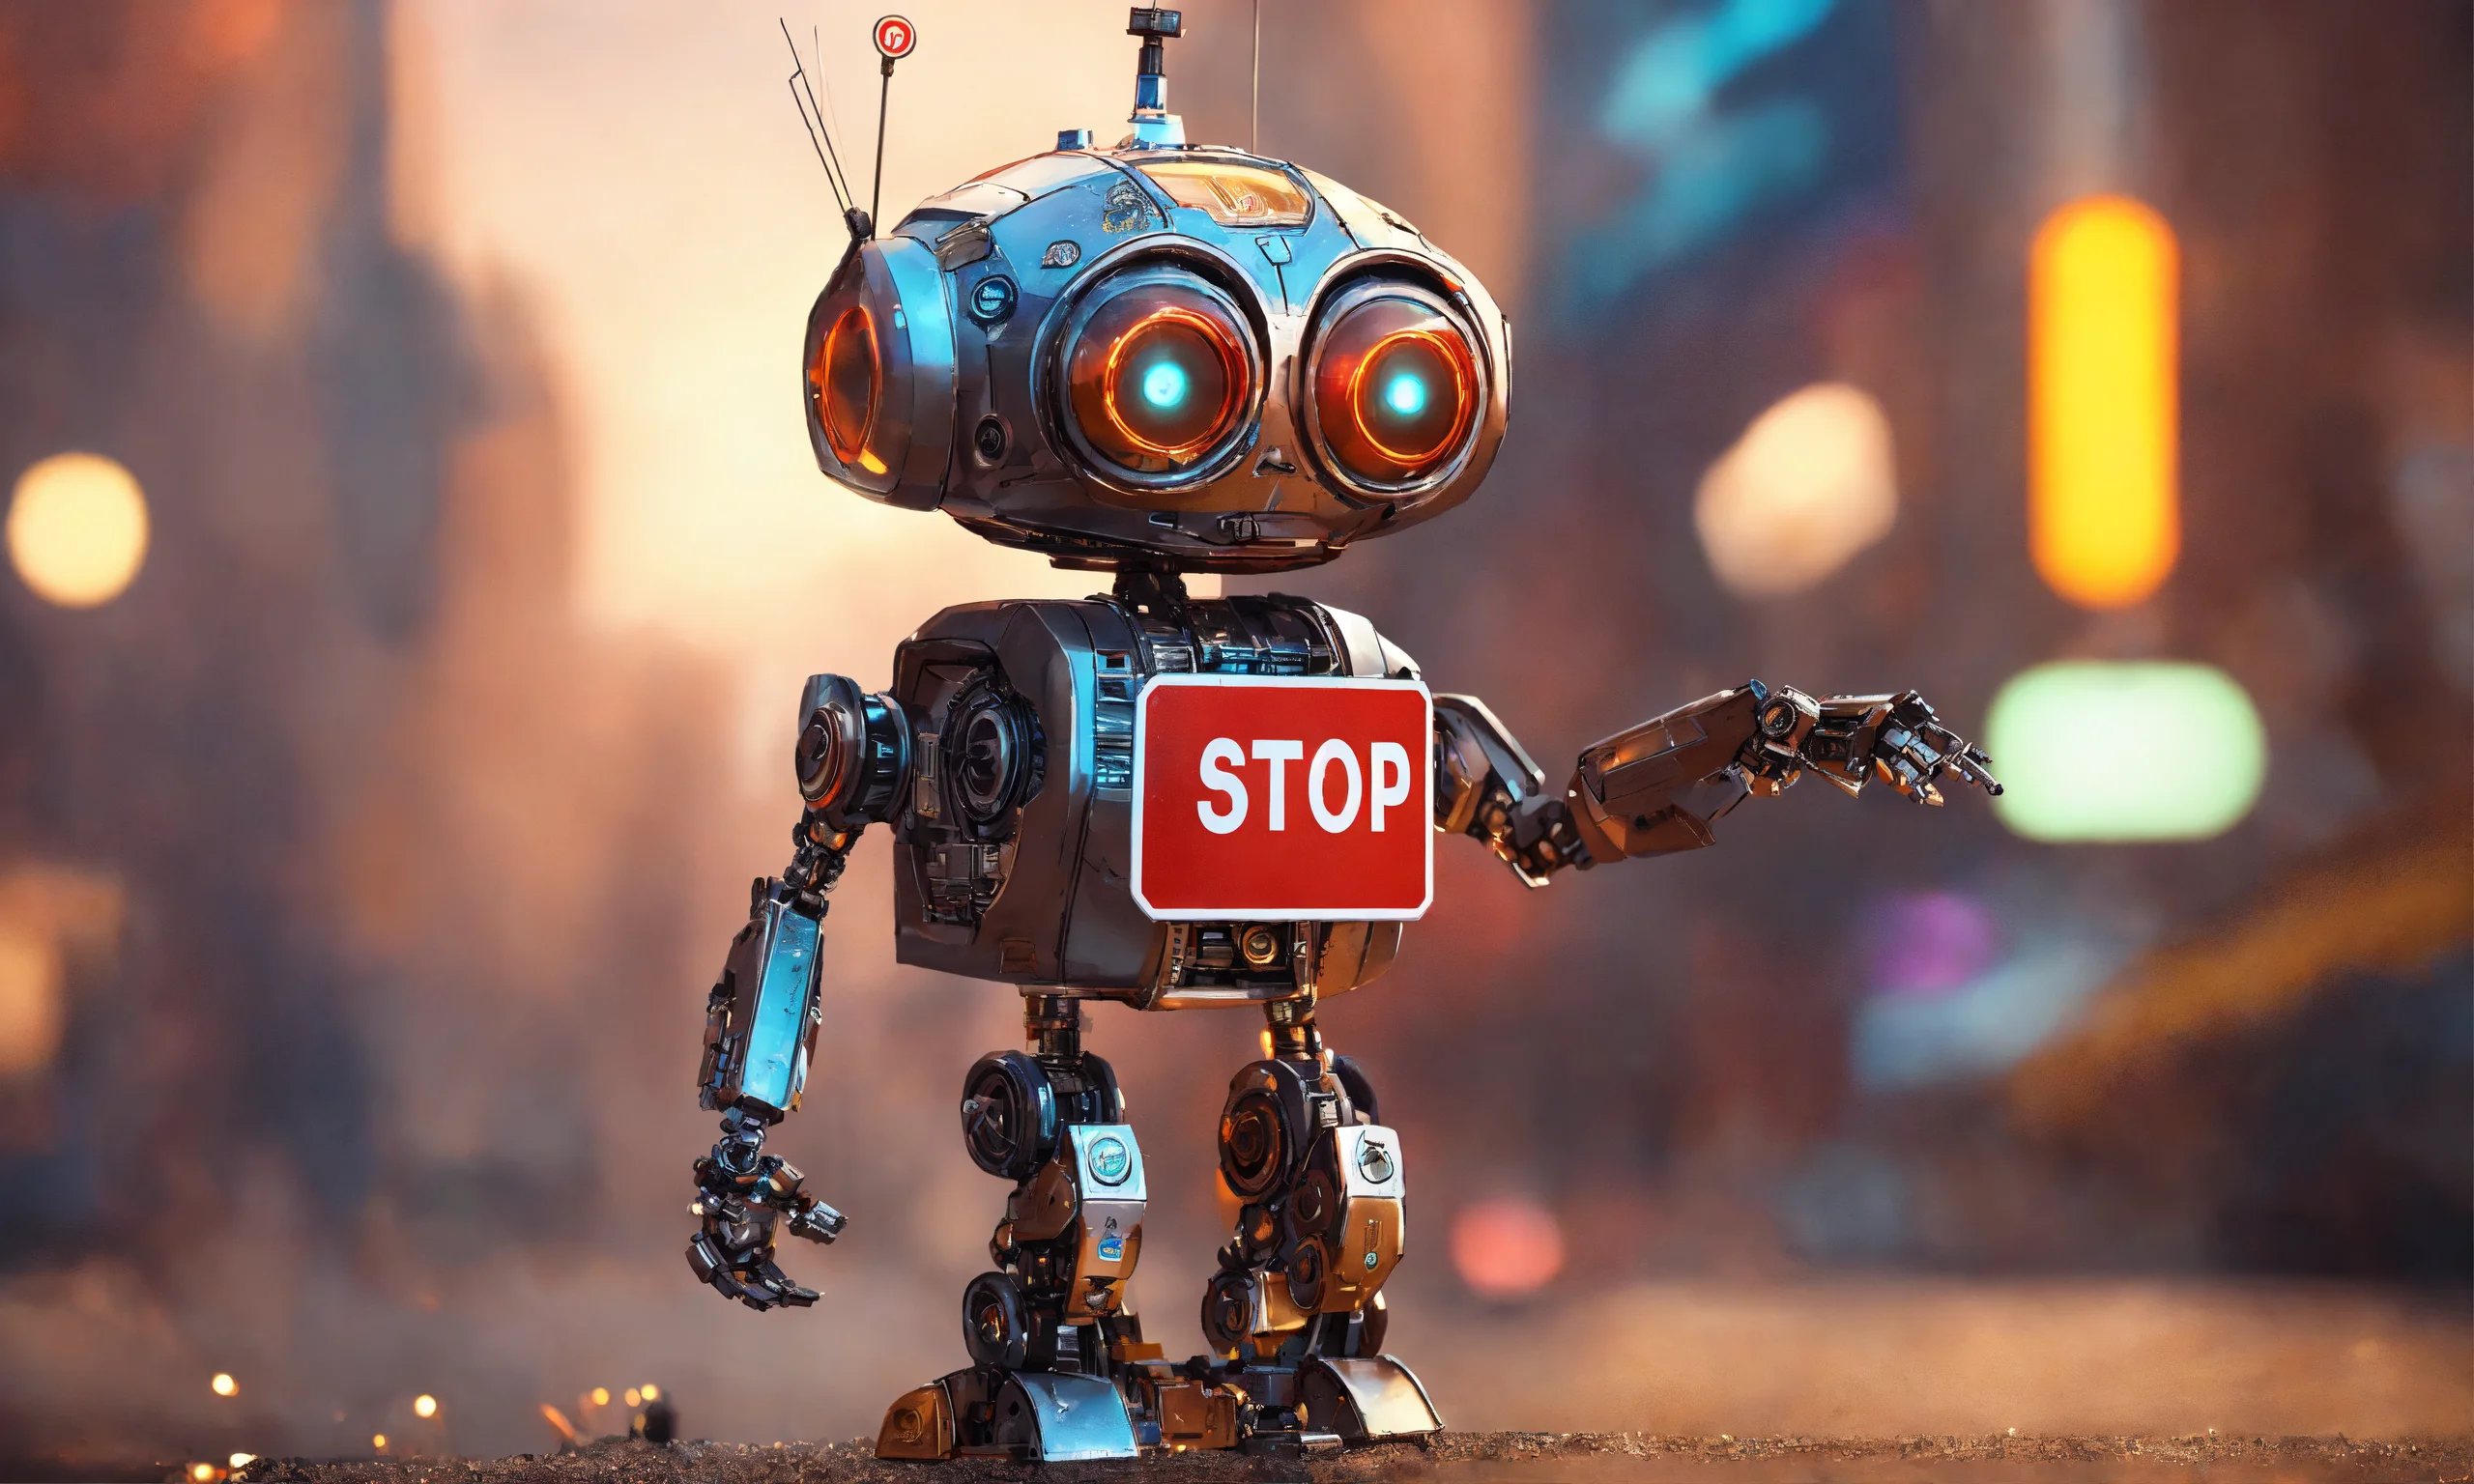 A tiny robot with a stop sign